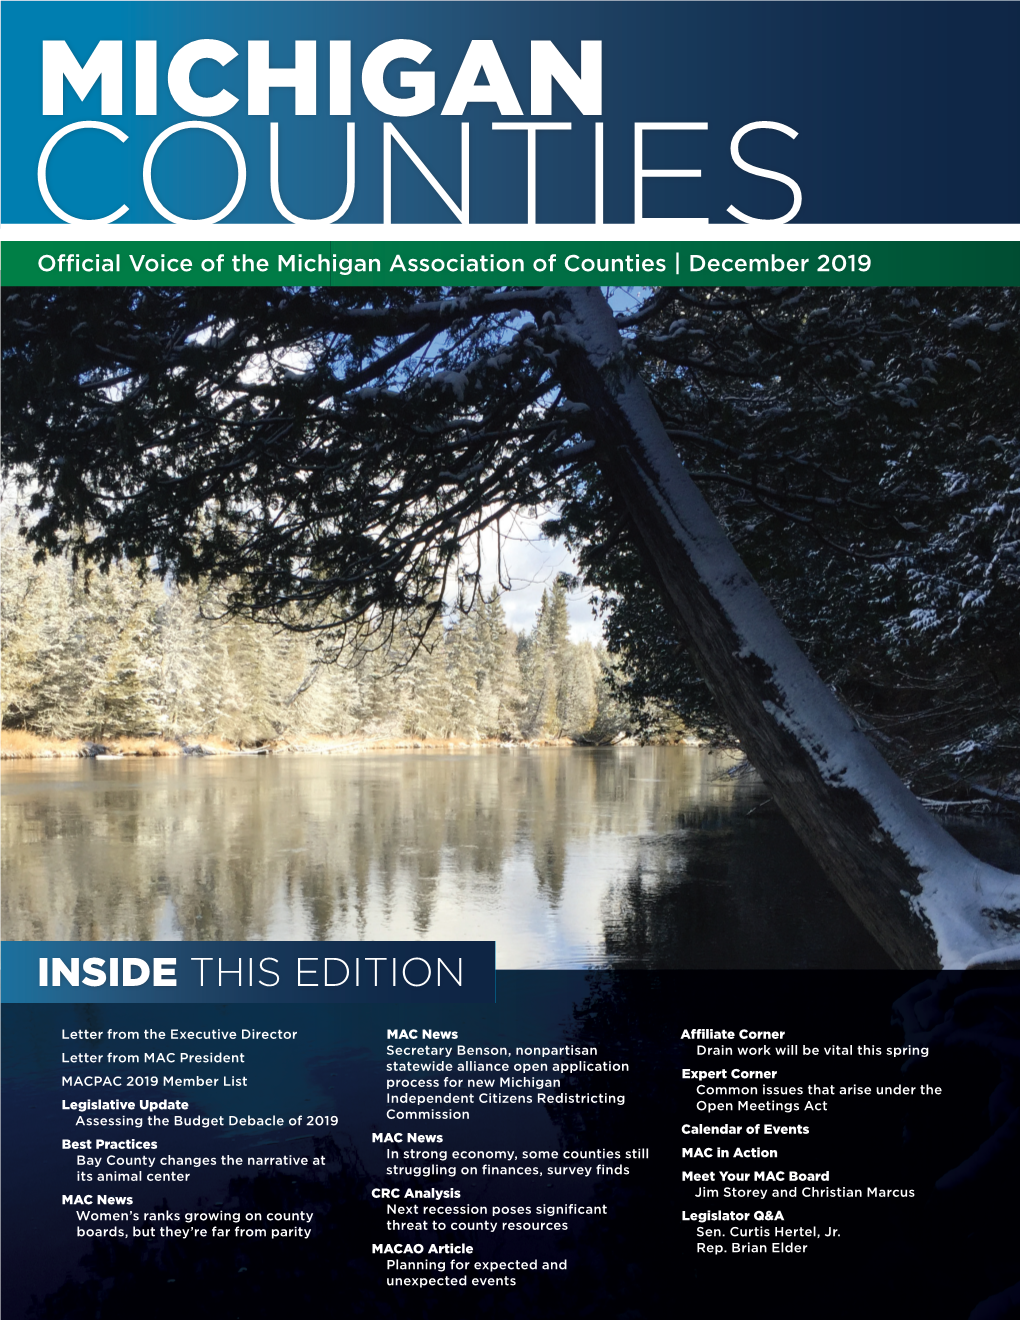 MICHIGAN COUNTIES Official Voice of the Michigan Association of Counties | December 2019